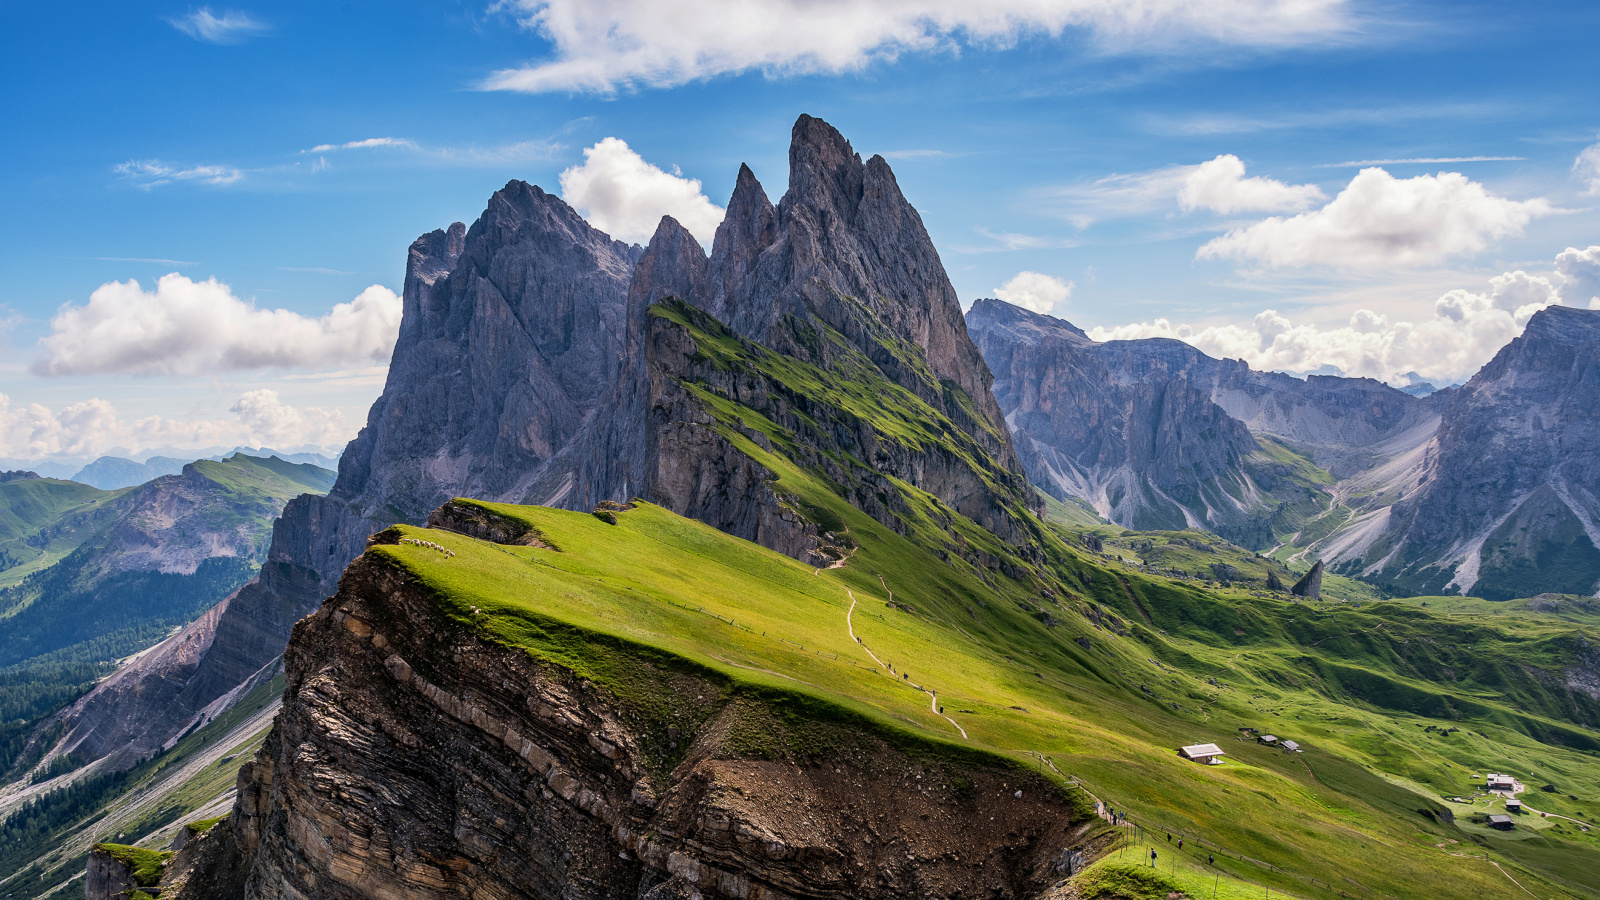 Parco Naturale Puez Odle Dolomites South Tyrol in Italy screenshot #1 1600x900